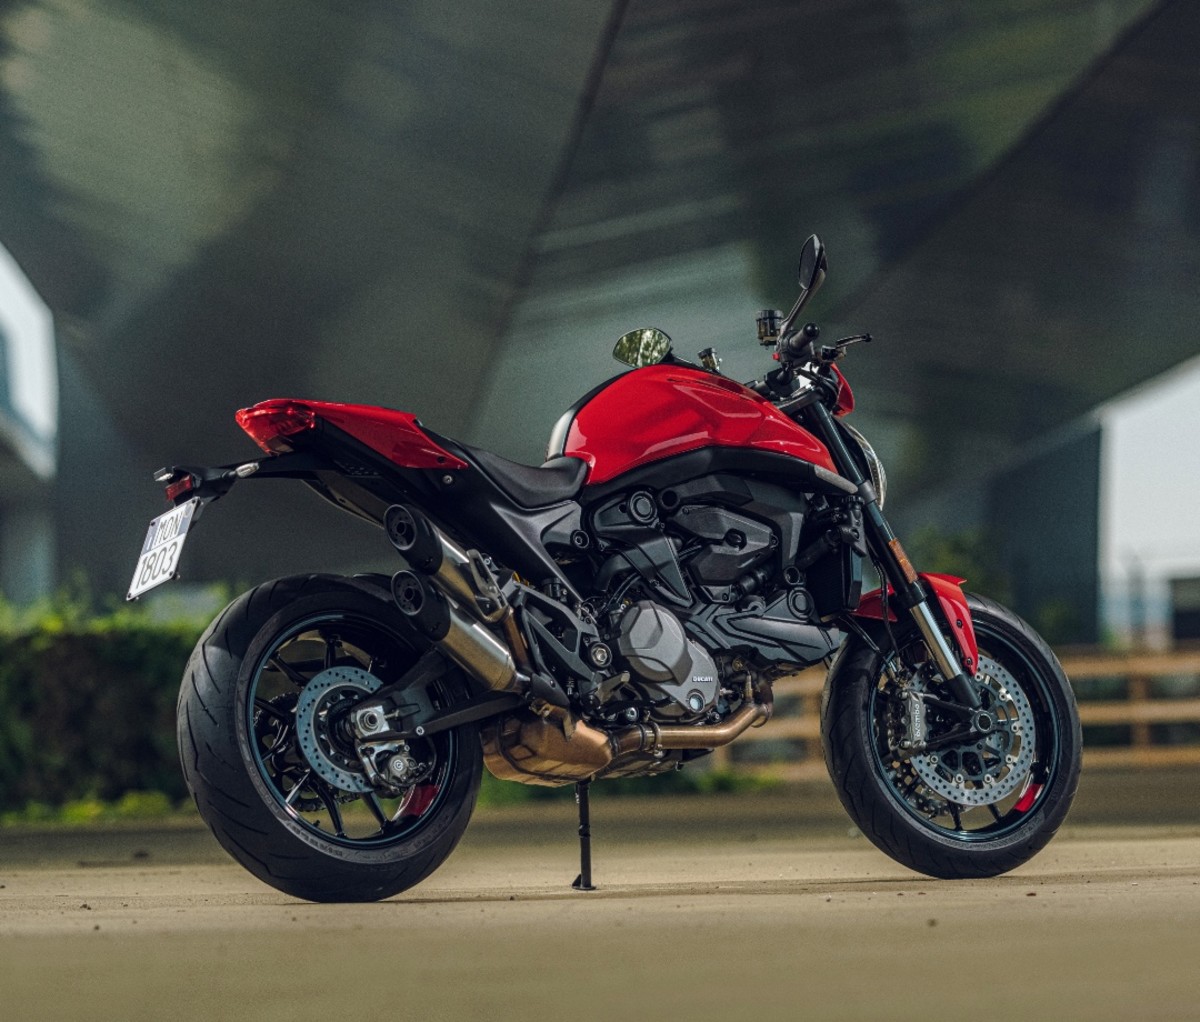 The 2022 Ducati Monster Plus gets a fresh new look.